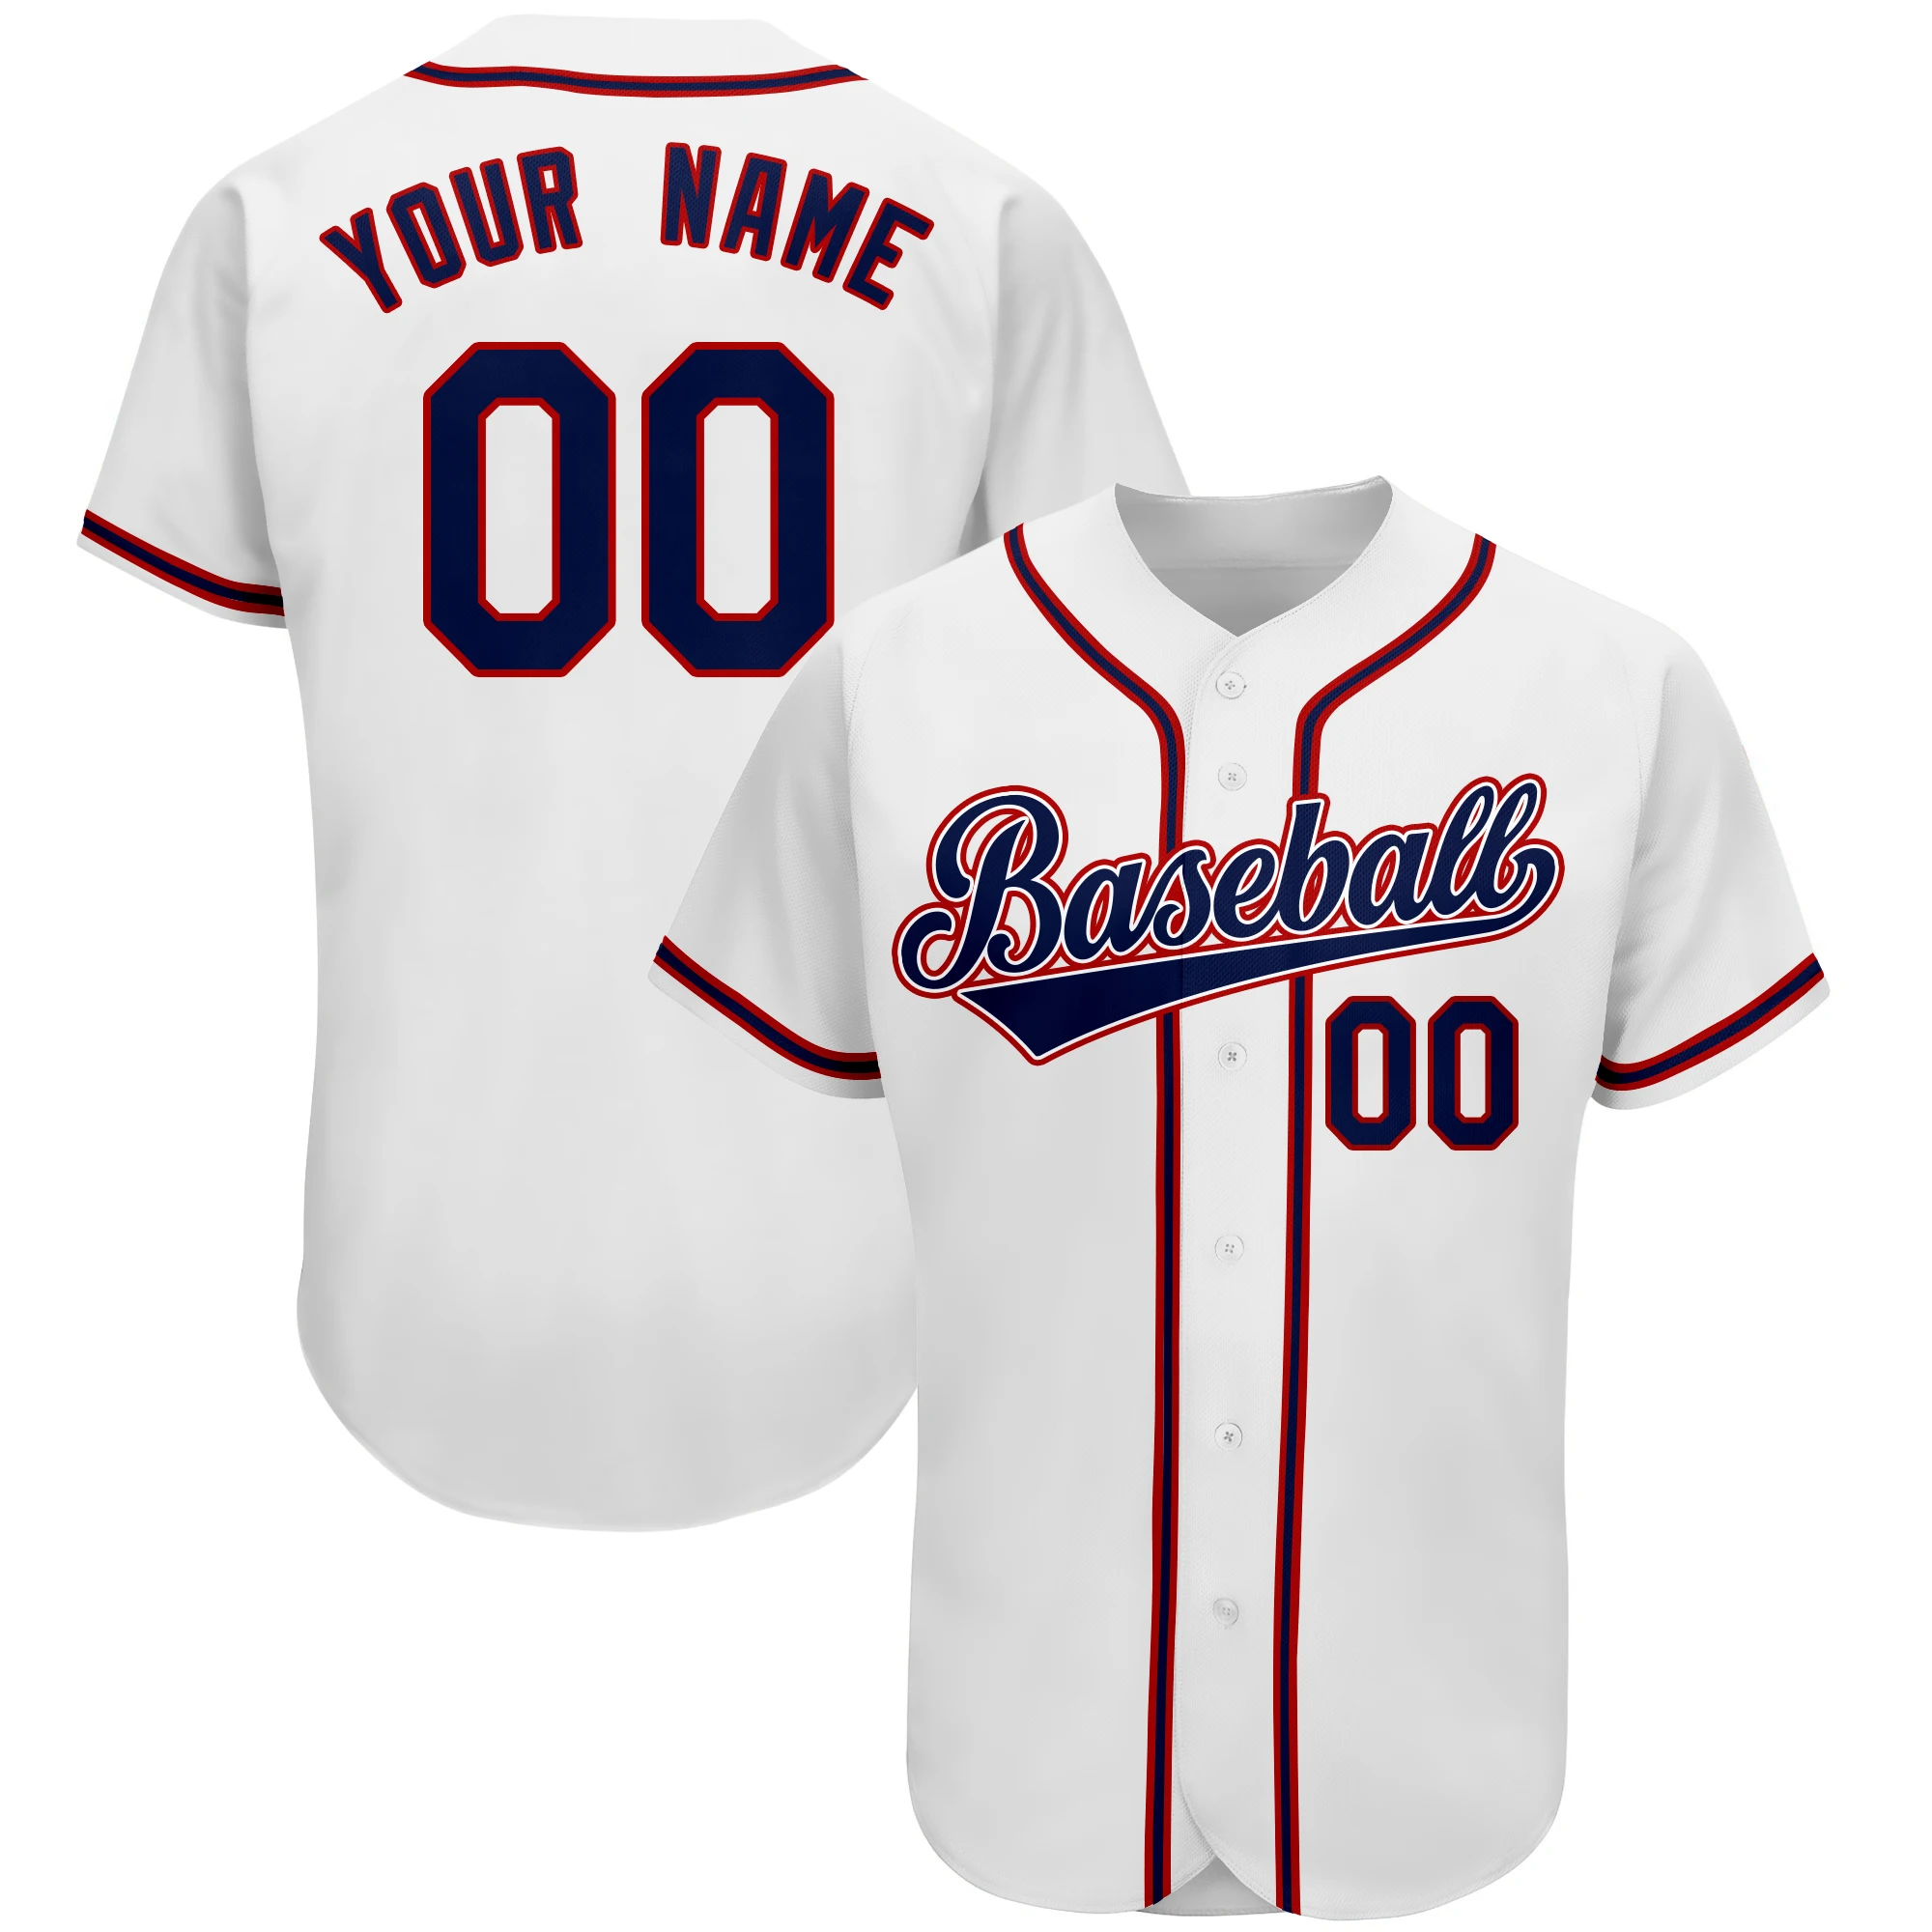 

Custom Baseball Jersey Full Sublimated Team Name/Numbers Make Your Own Sportswear for Men/Boy Awesome Birthday Gift fans Party